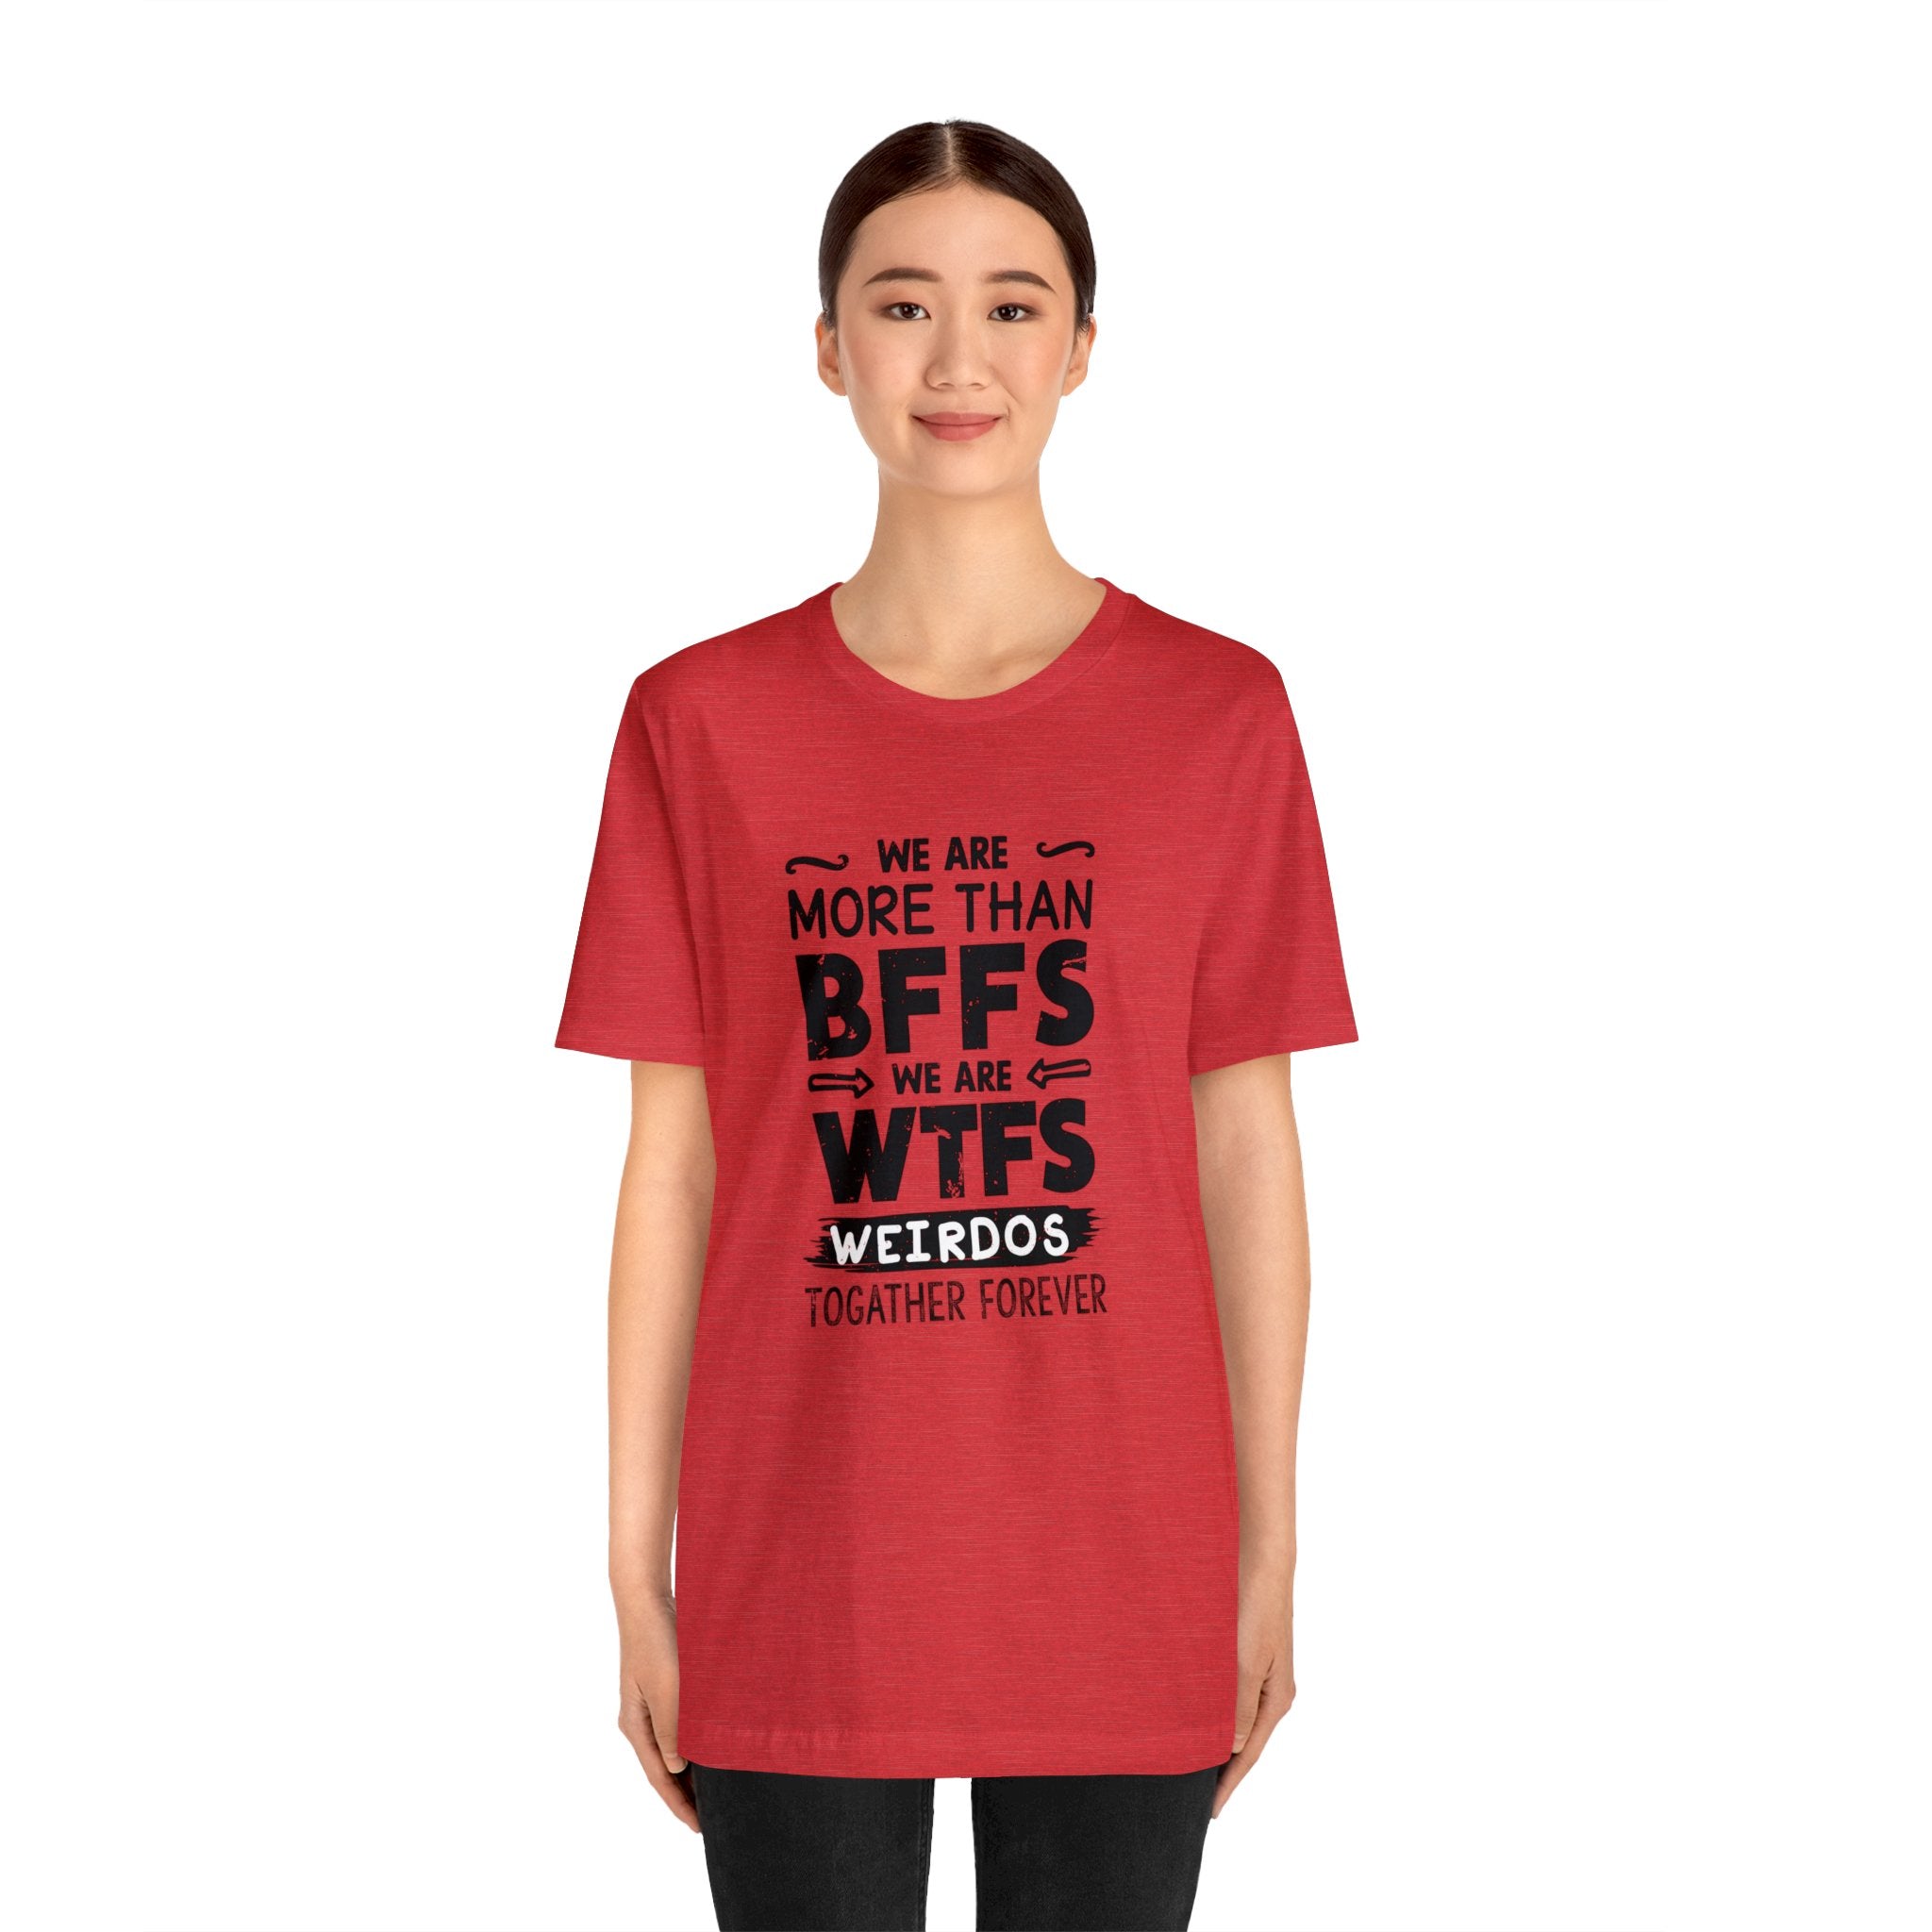 A woman wearing a red We Are More T-Shirt with the text "be more than bffs" on it.